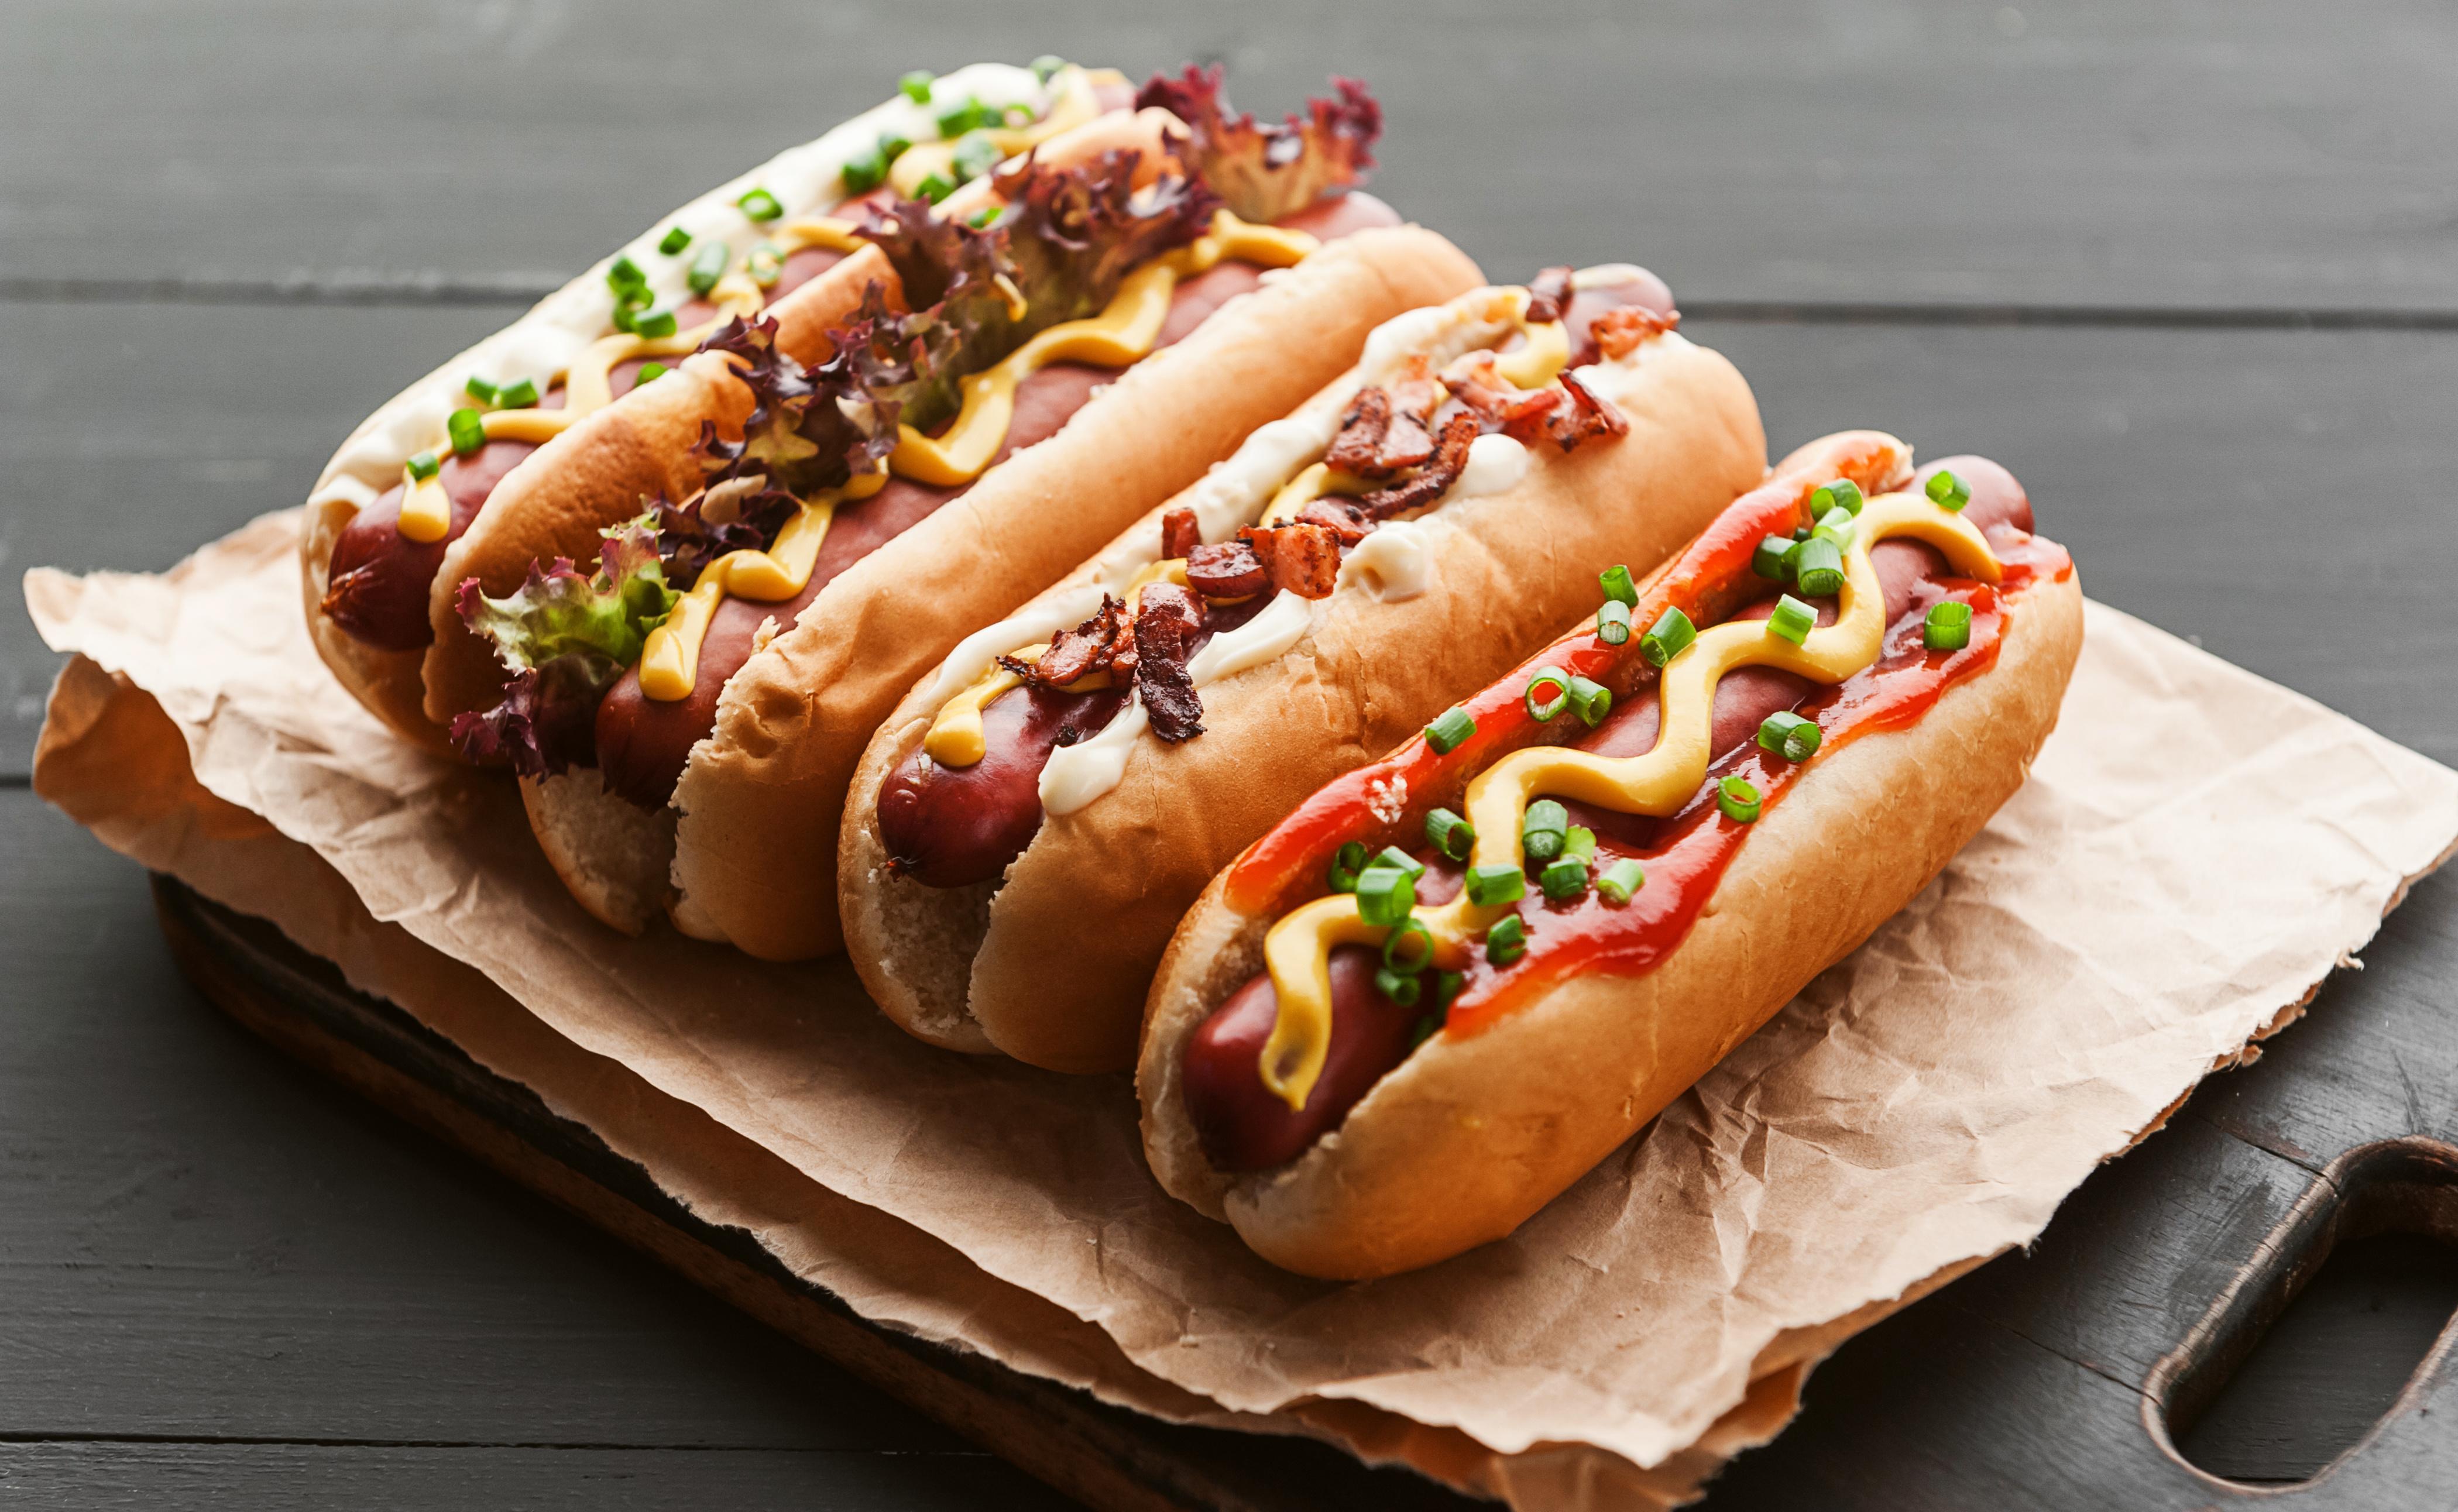 Grab your dogs and go get a good deal on hot dogs for National Hot